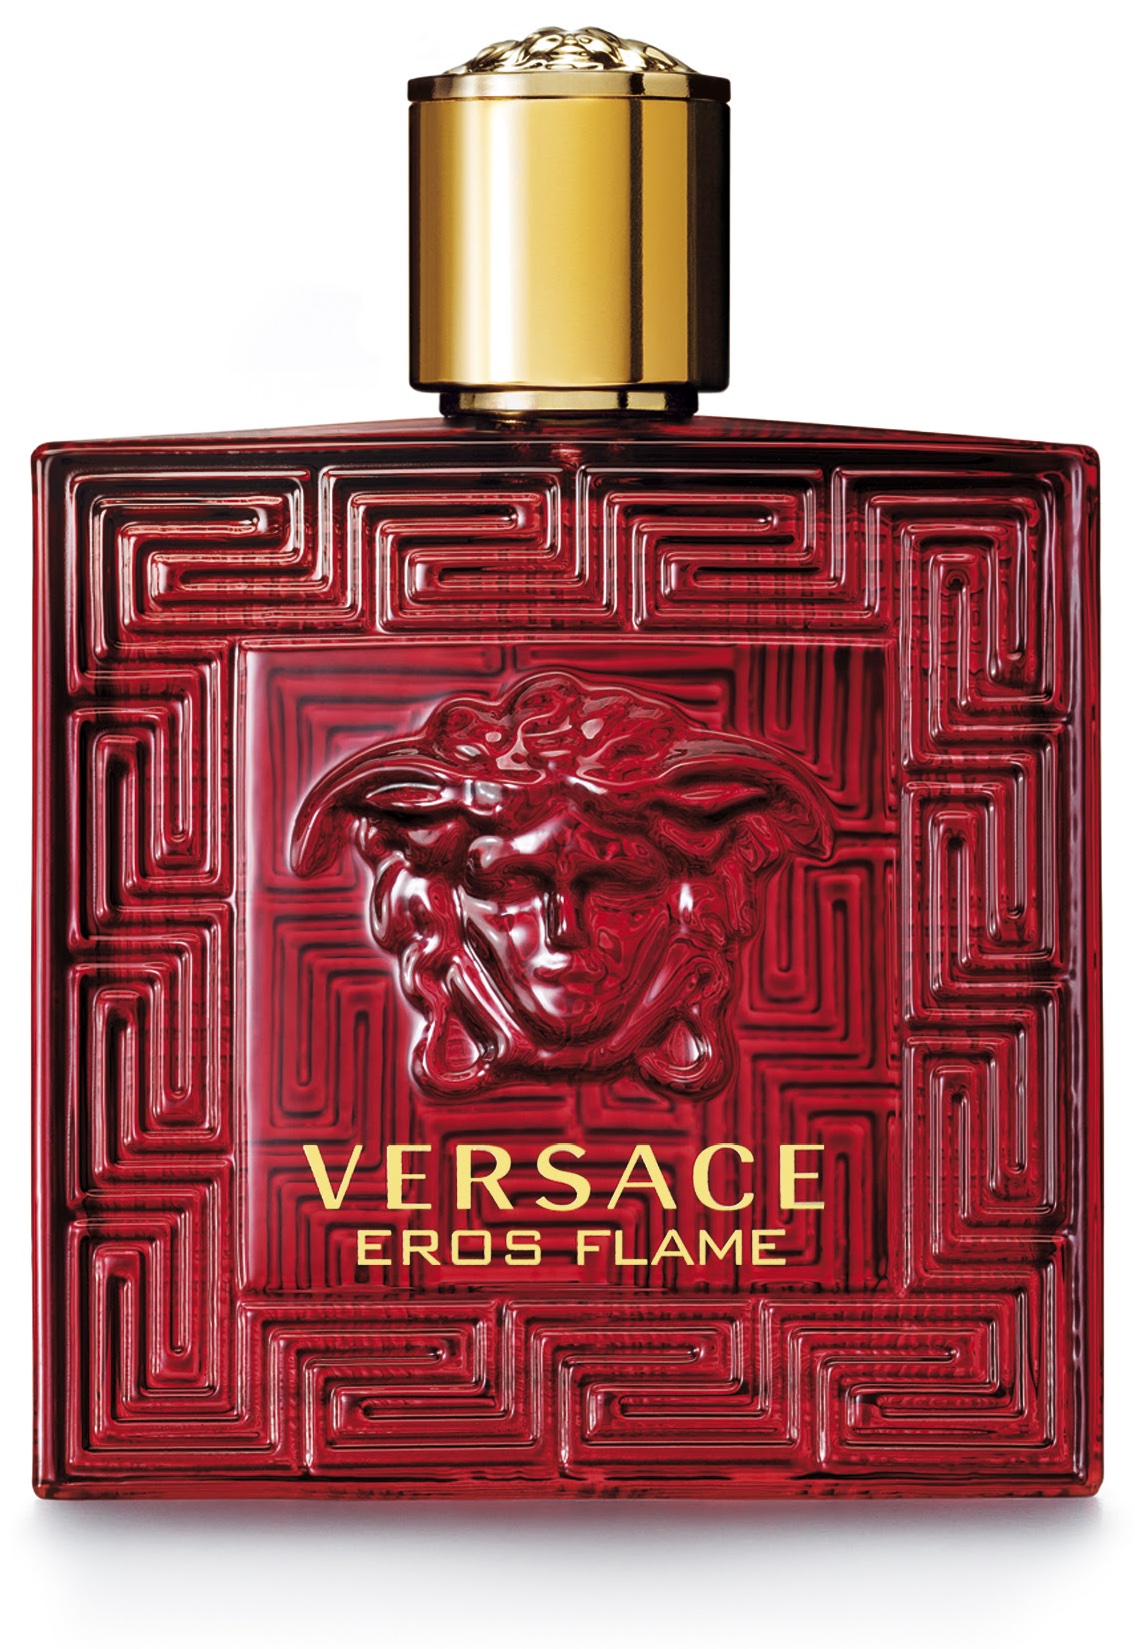 Versace channels the god of love with latest male fragrance release
